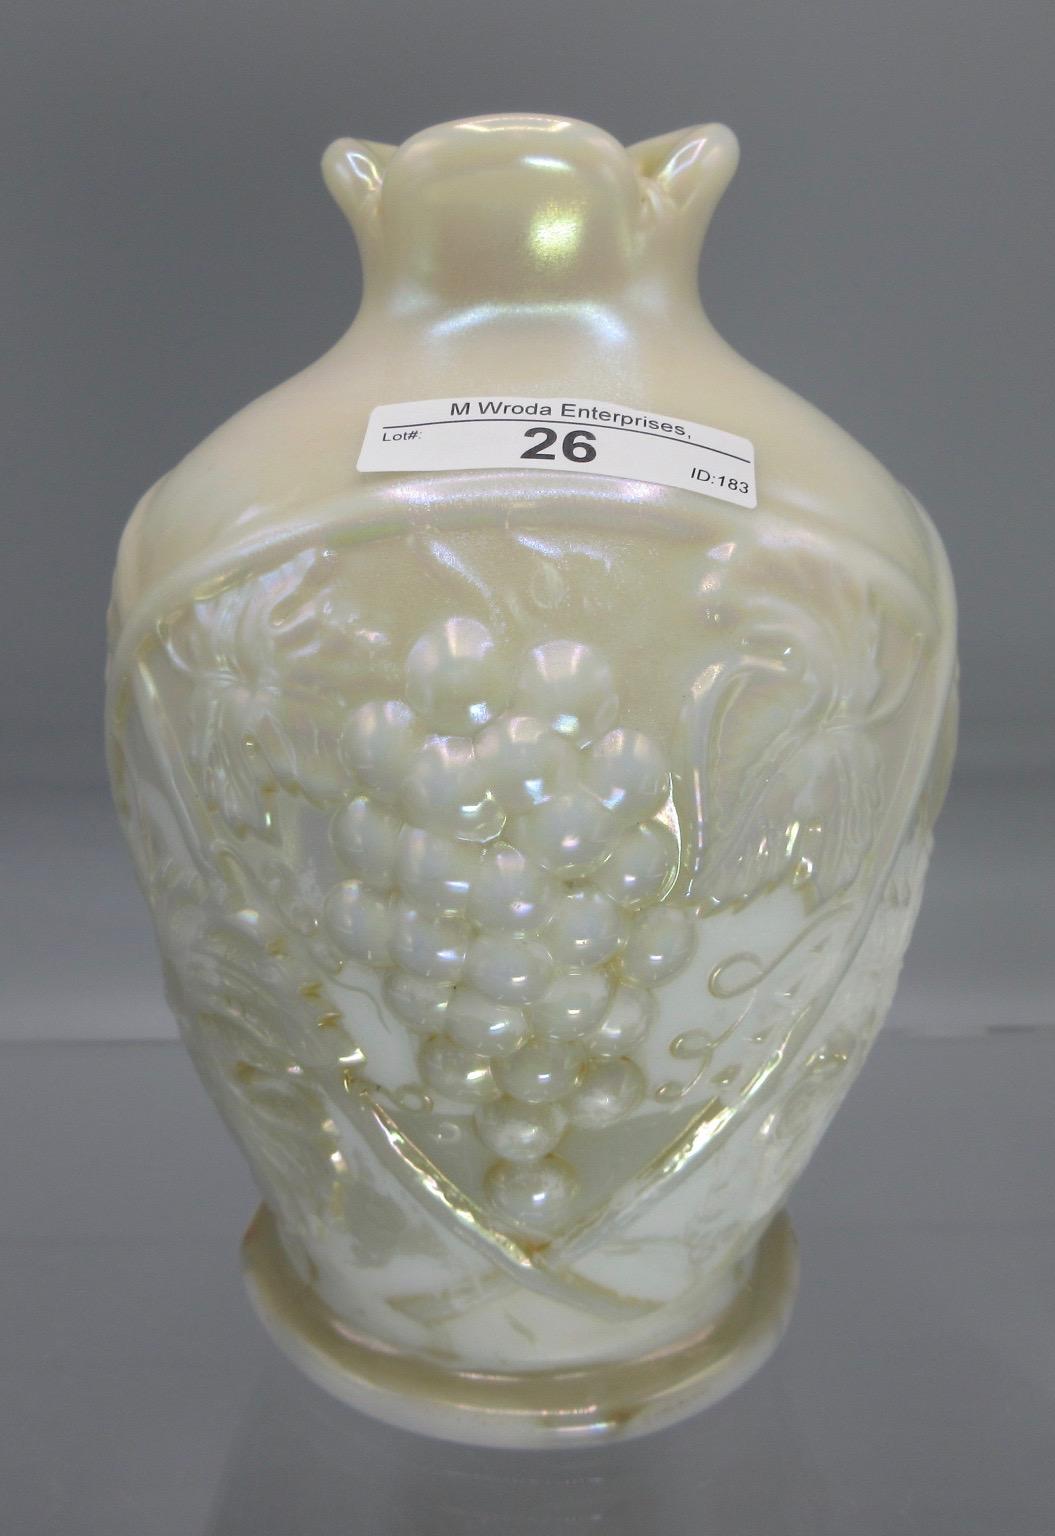 US Glass Palm Beach 7" pearlized milk glass bulbous pinched top vase.